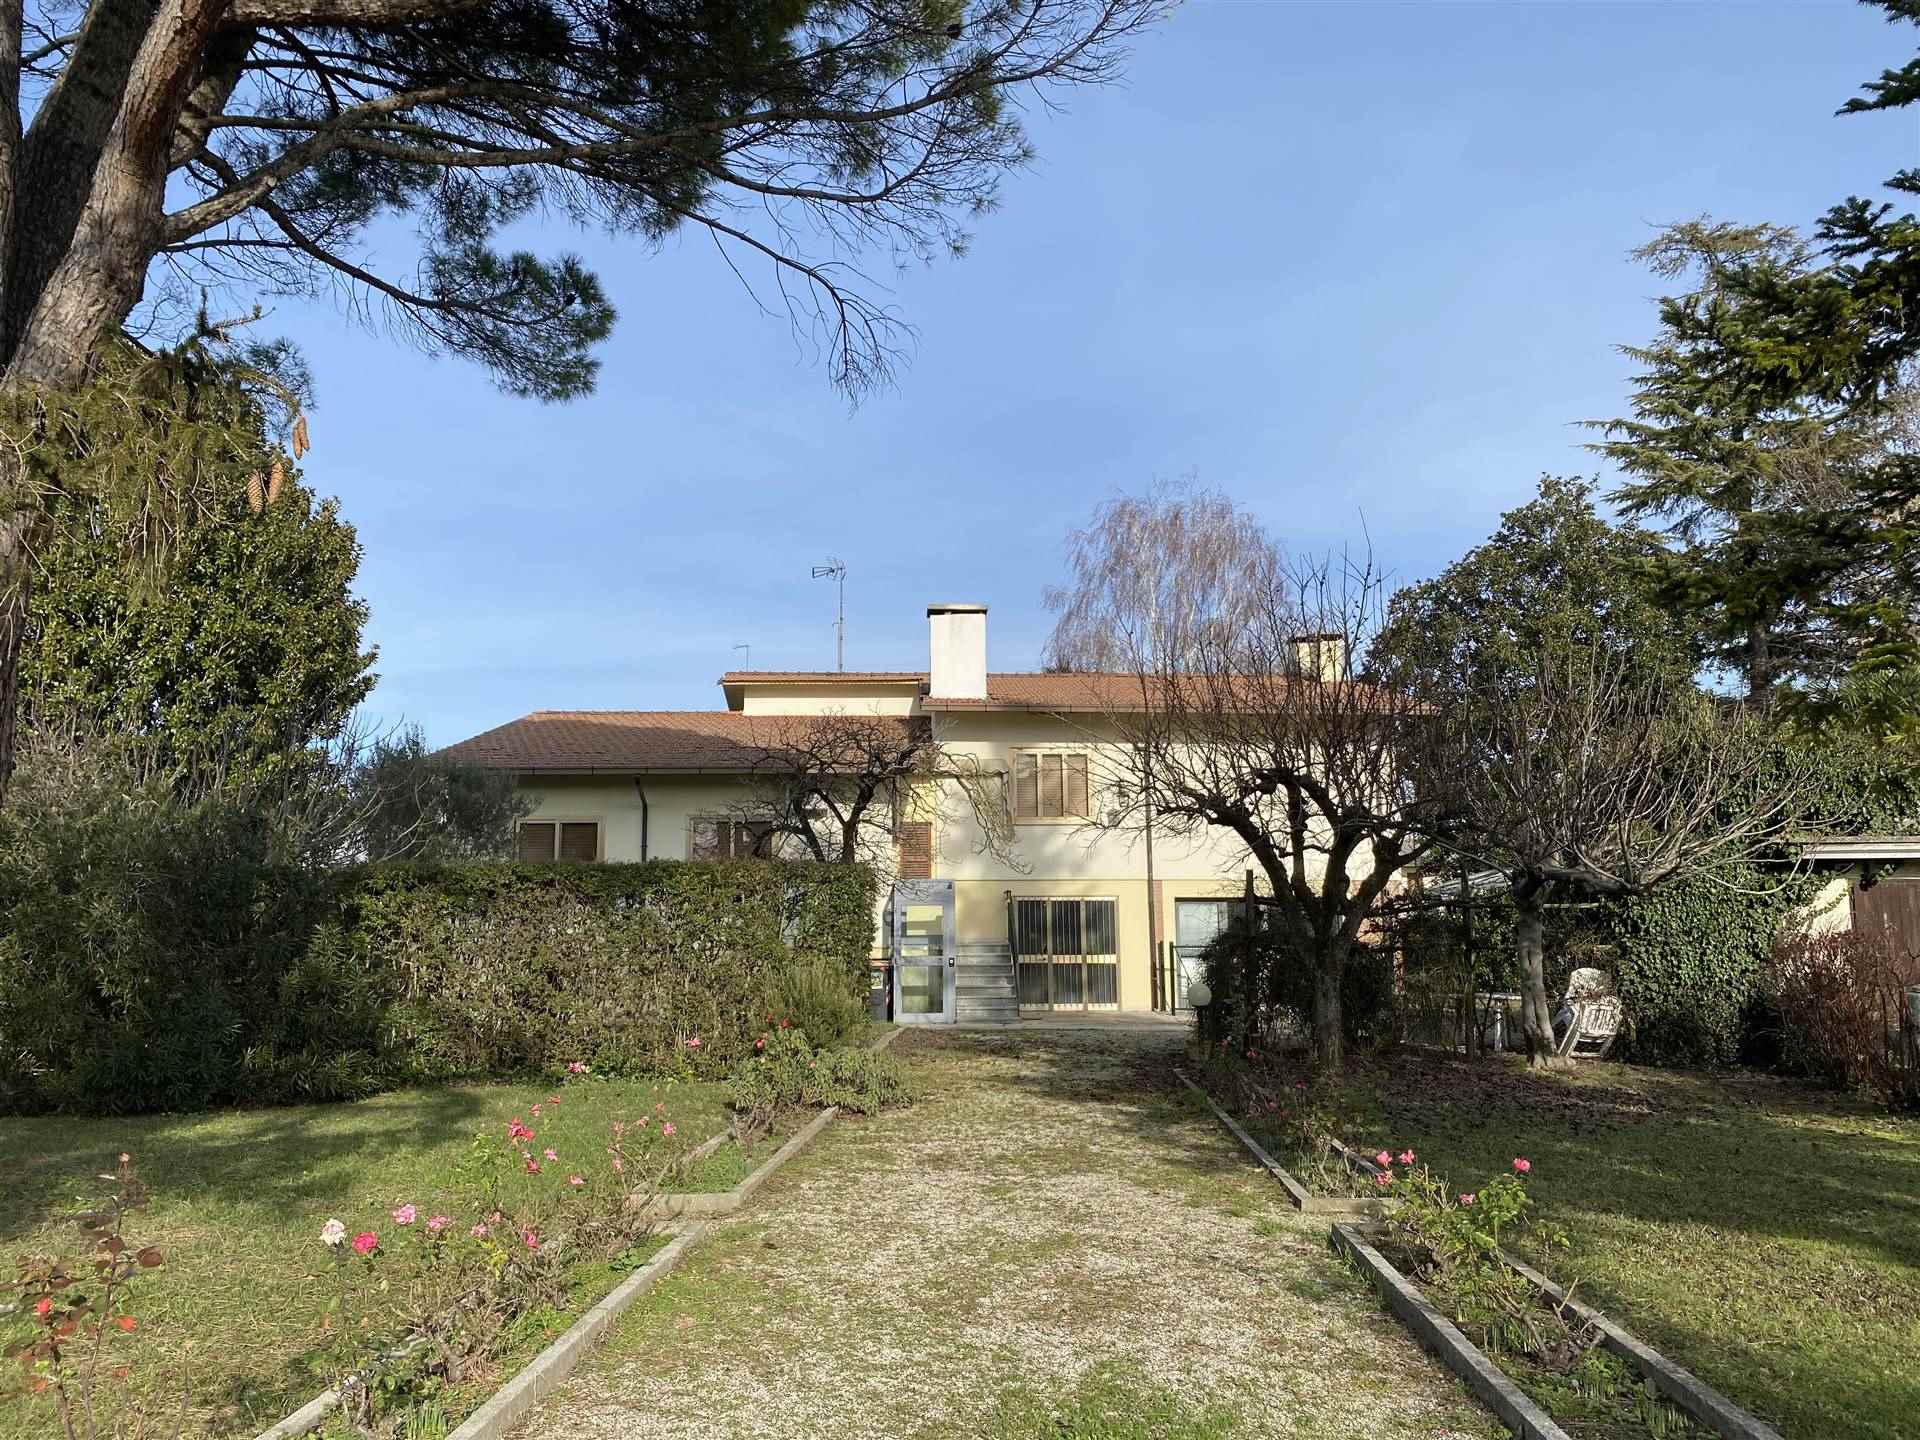 PORTOGRUARO, Villa for sale of 154 Sq. mt., Habitable, Heating Individual heating system, Energetic class: E, placed at Raised, composed by: 10 Rooms, Separate kitchen, , 5 Bedrooms, 2 Bathrooms, 